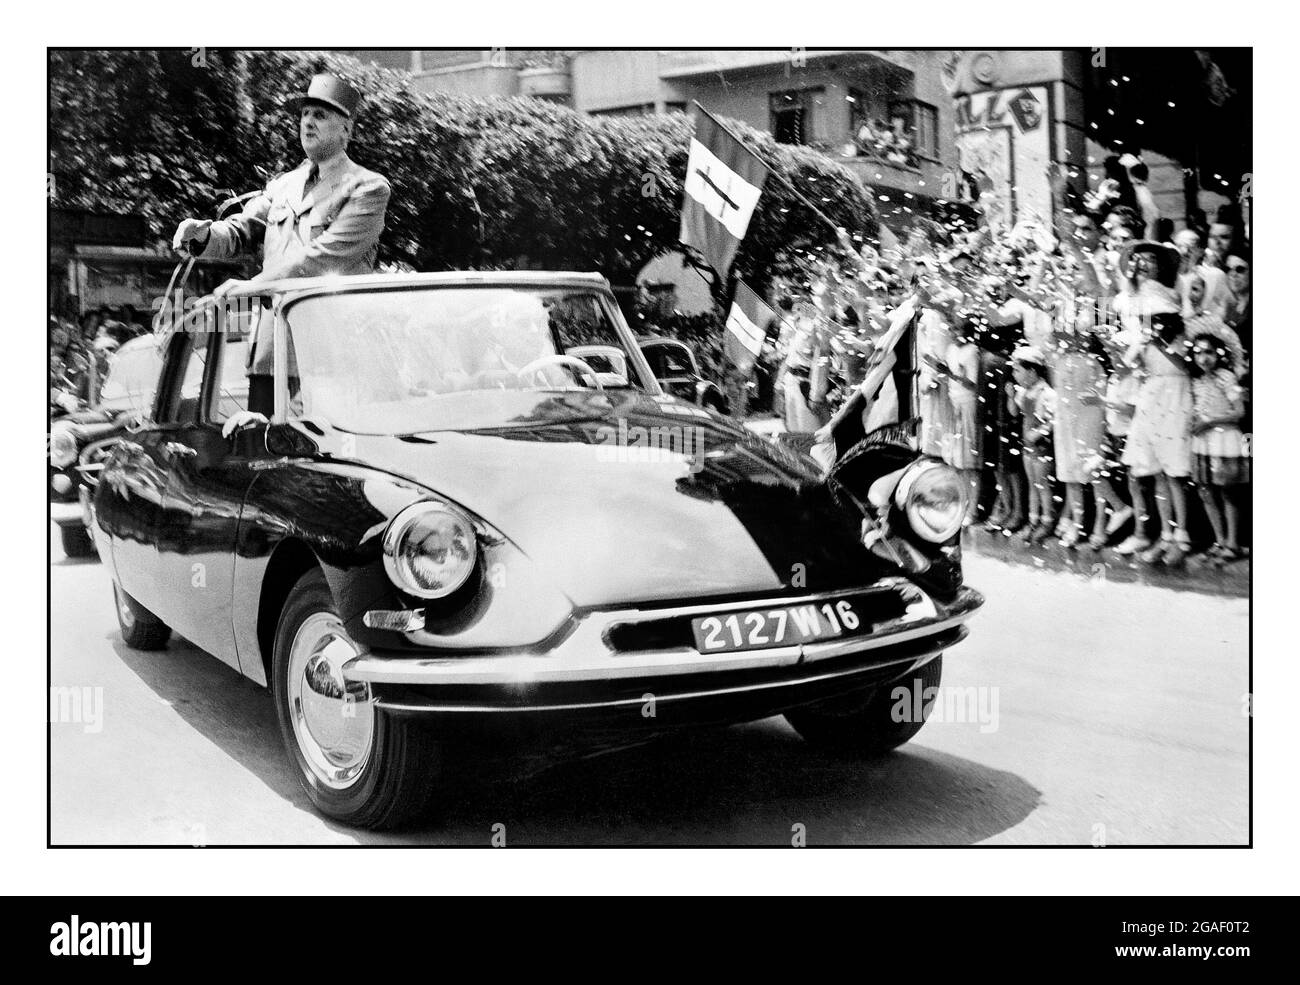 President Charles De Gaulle post war popular hero of France in a  Citroen DS 19.  On August 22, 1962, President Charles De Gaulle of France survives one of many assassination attempts against him thanks to the performance of the presidential Citroen automobile: The aerodynamic Citroen DS 19, was also known as “La Deesse” (The Goddess). Stock Photo